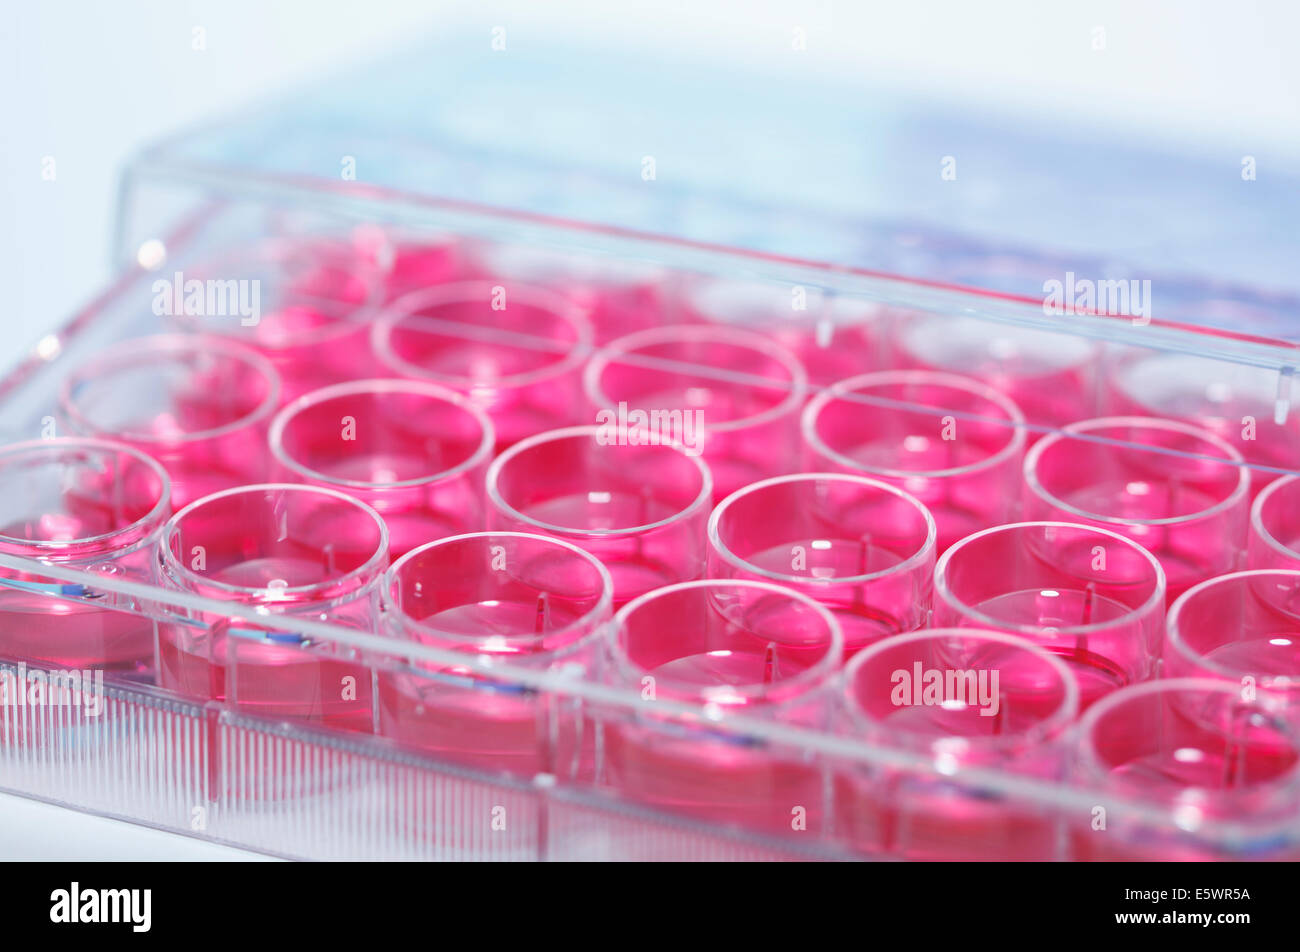 Multiwell dish containing cell culture medium (DMEM) Stock Photo